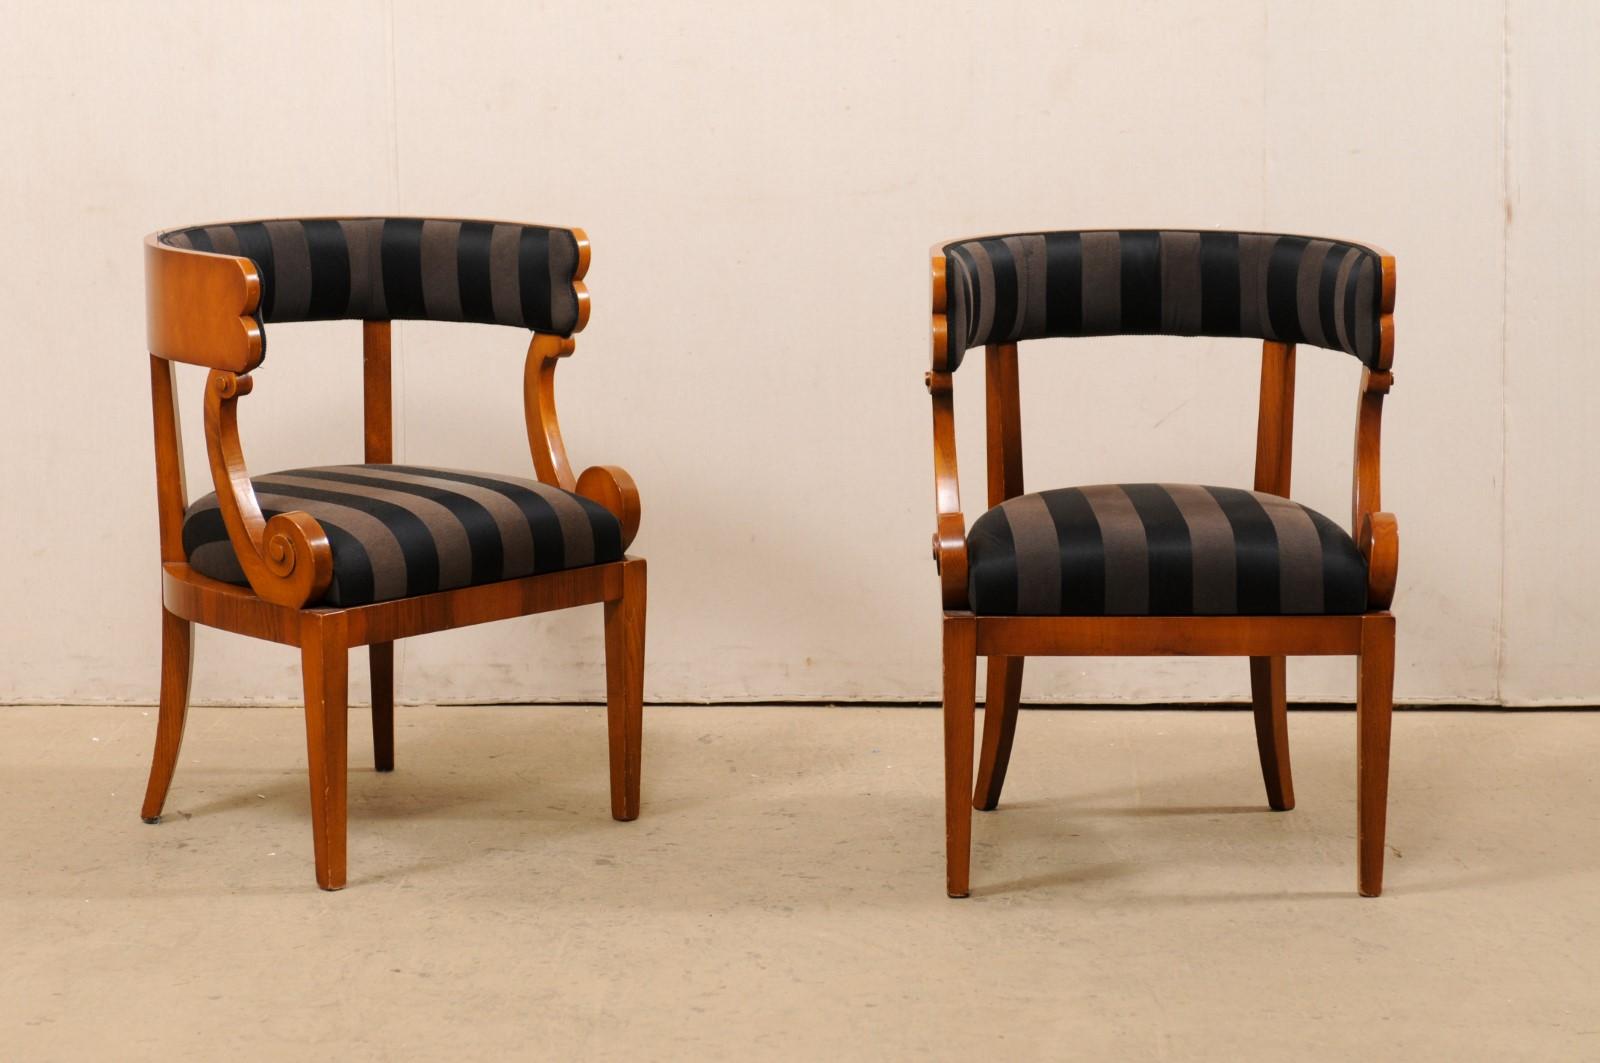 An Italian pair of barrel back occasional chairs. This vintage pair of chairs from Italy each feature barreled backrest supports, with arm supports at either side being carved in a lovely volute shape. Skirting is clean and simple, with chairs being